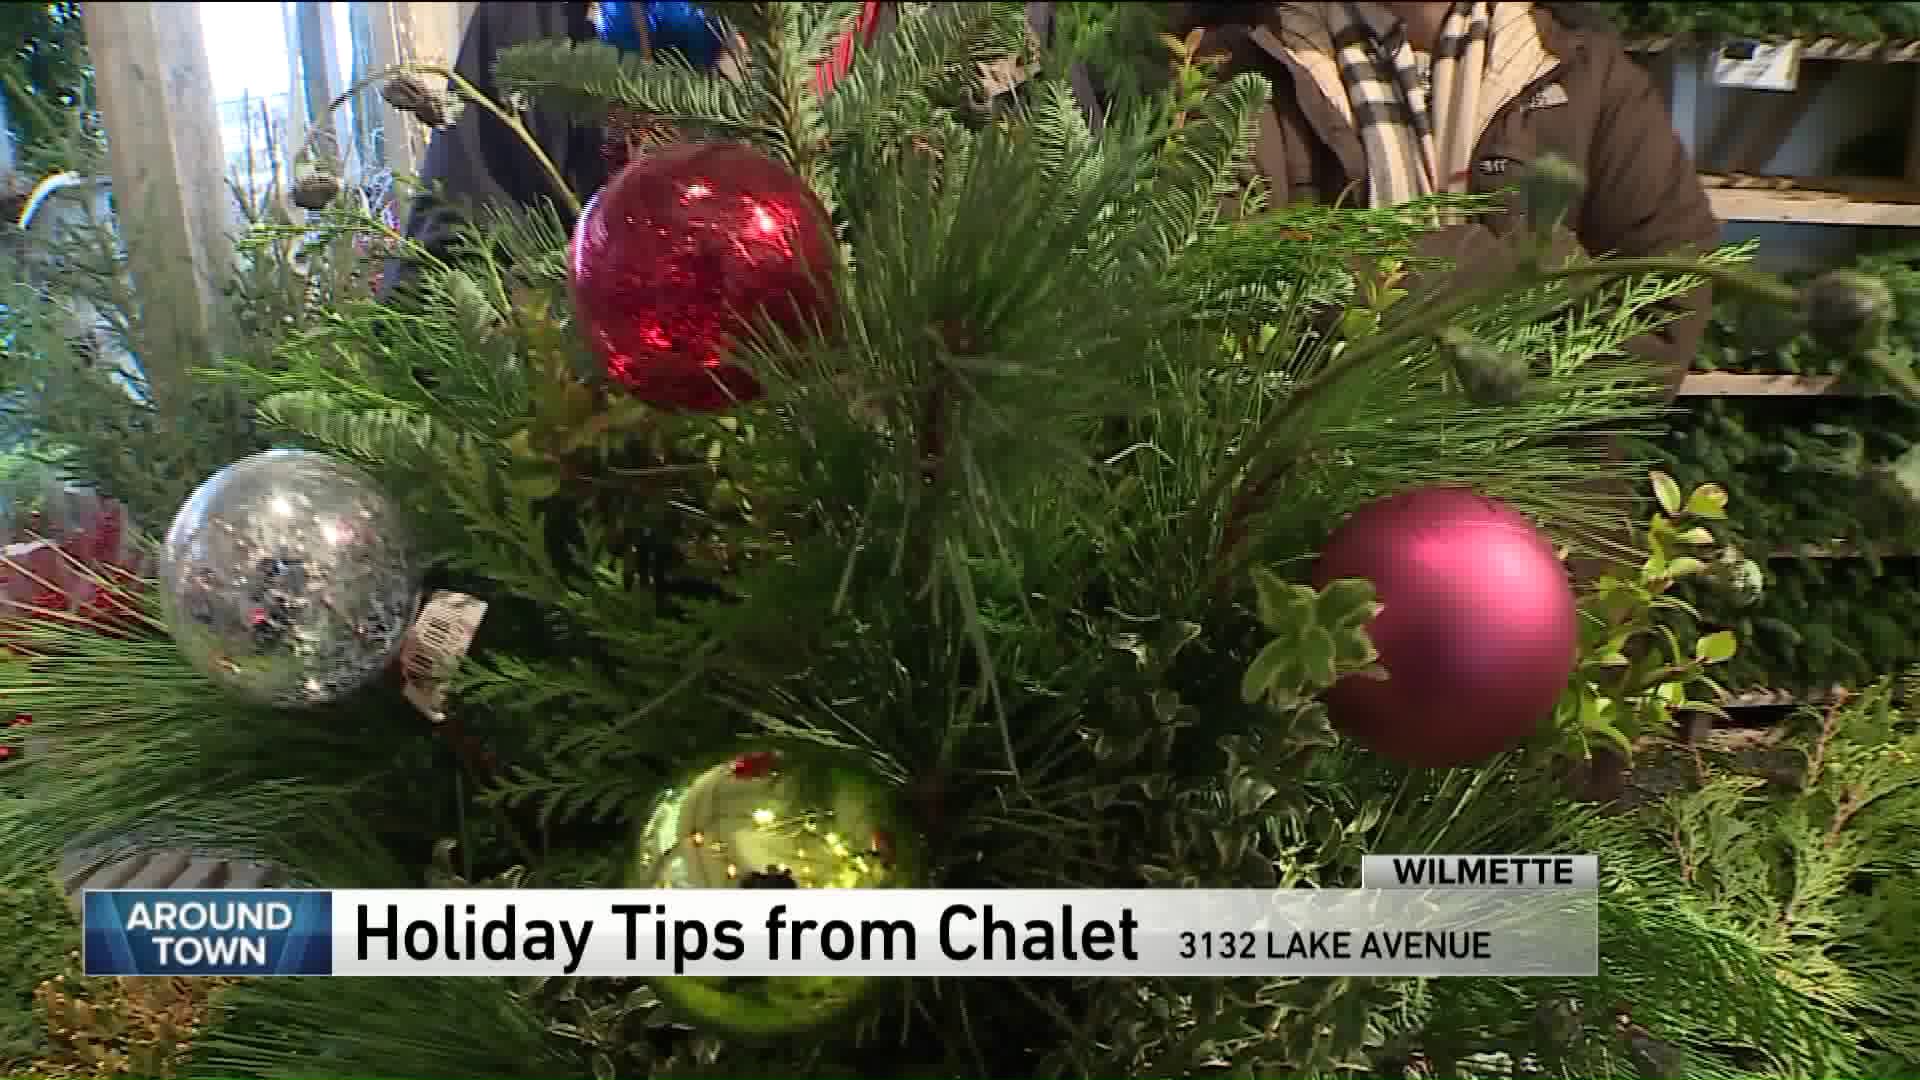 Around Town learns some tips and tricks from Chalet